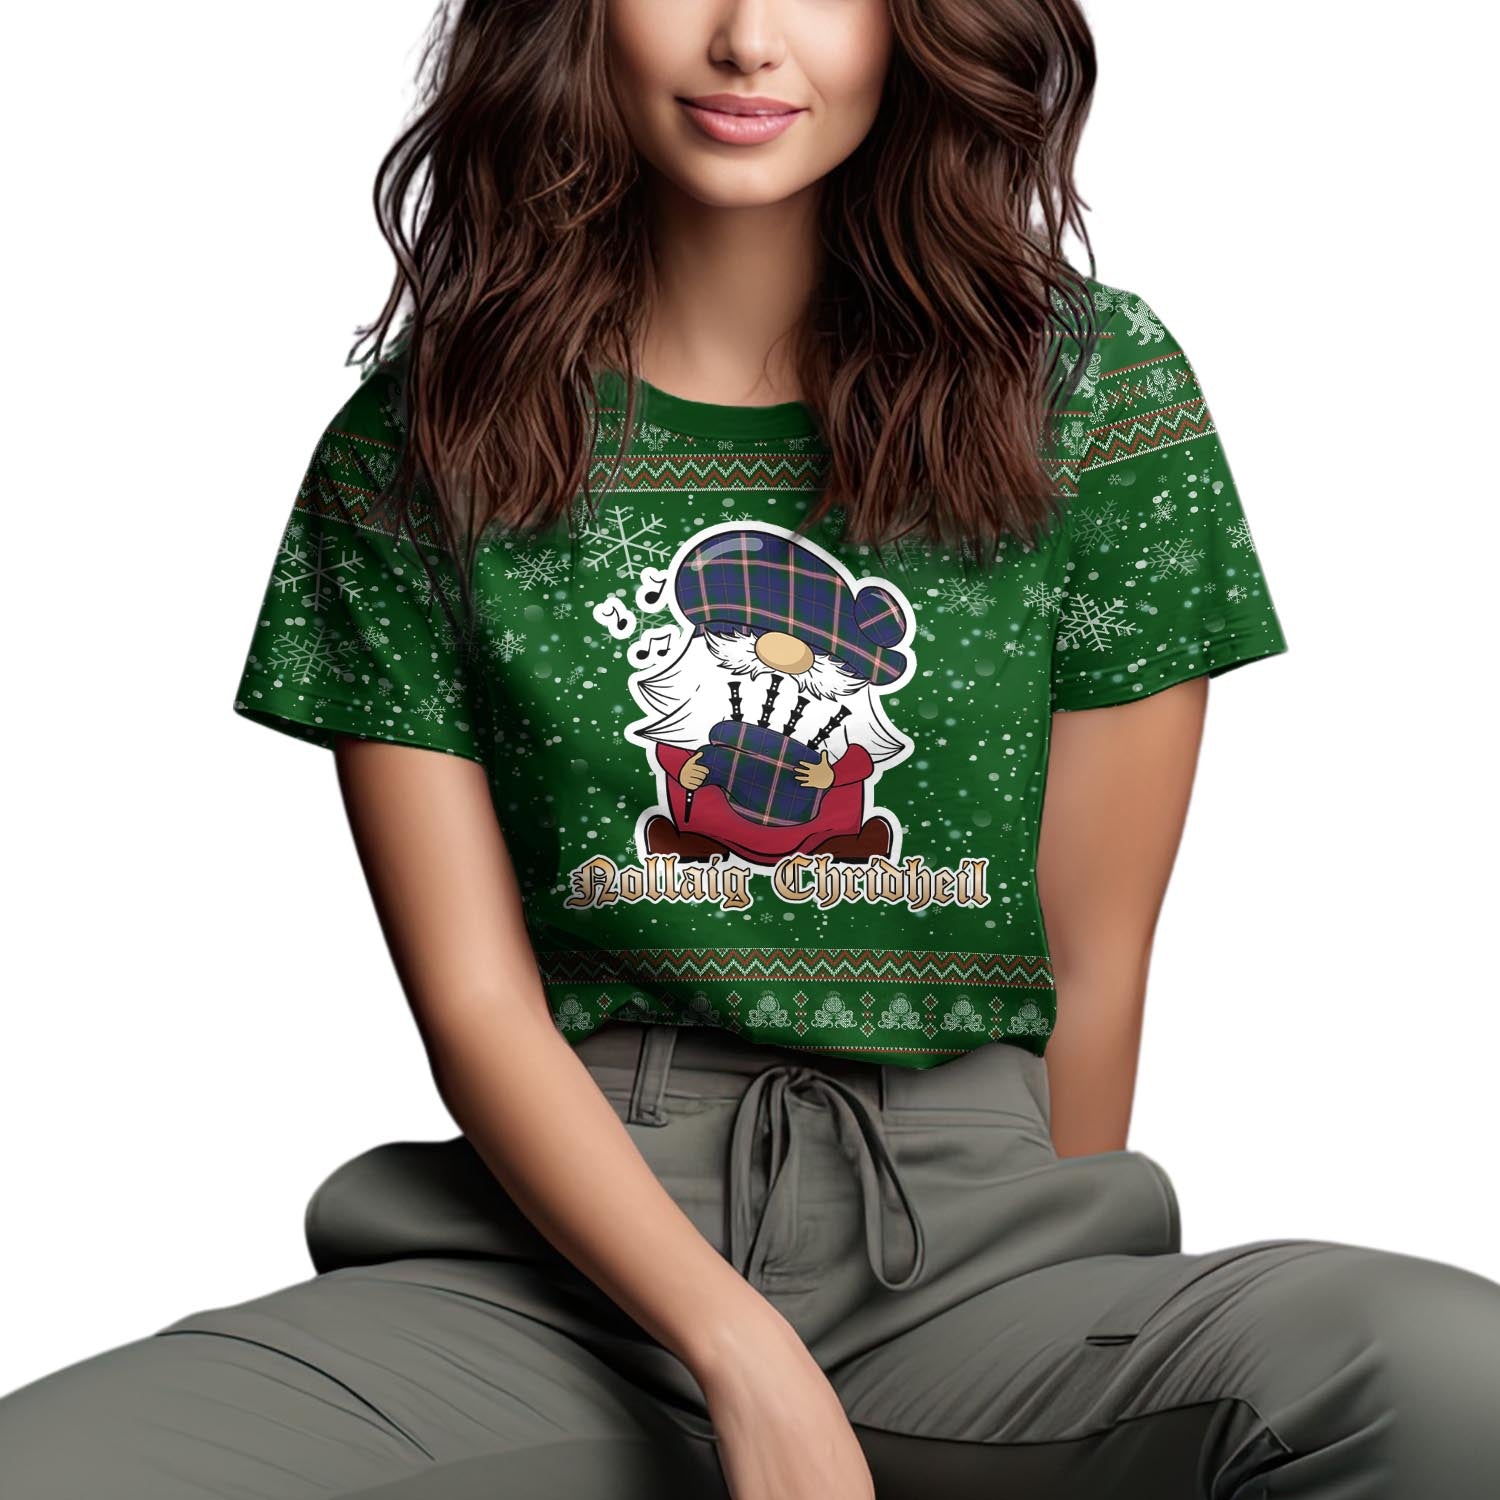 Canadian Centennial Canada Clan Christmas Family T-Shirt with Funny Gnome Playing Bagpipes Women's Shirt Green - Tartanvibesclothing